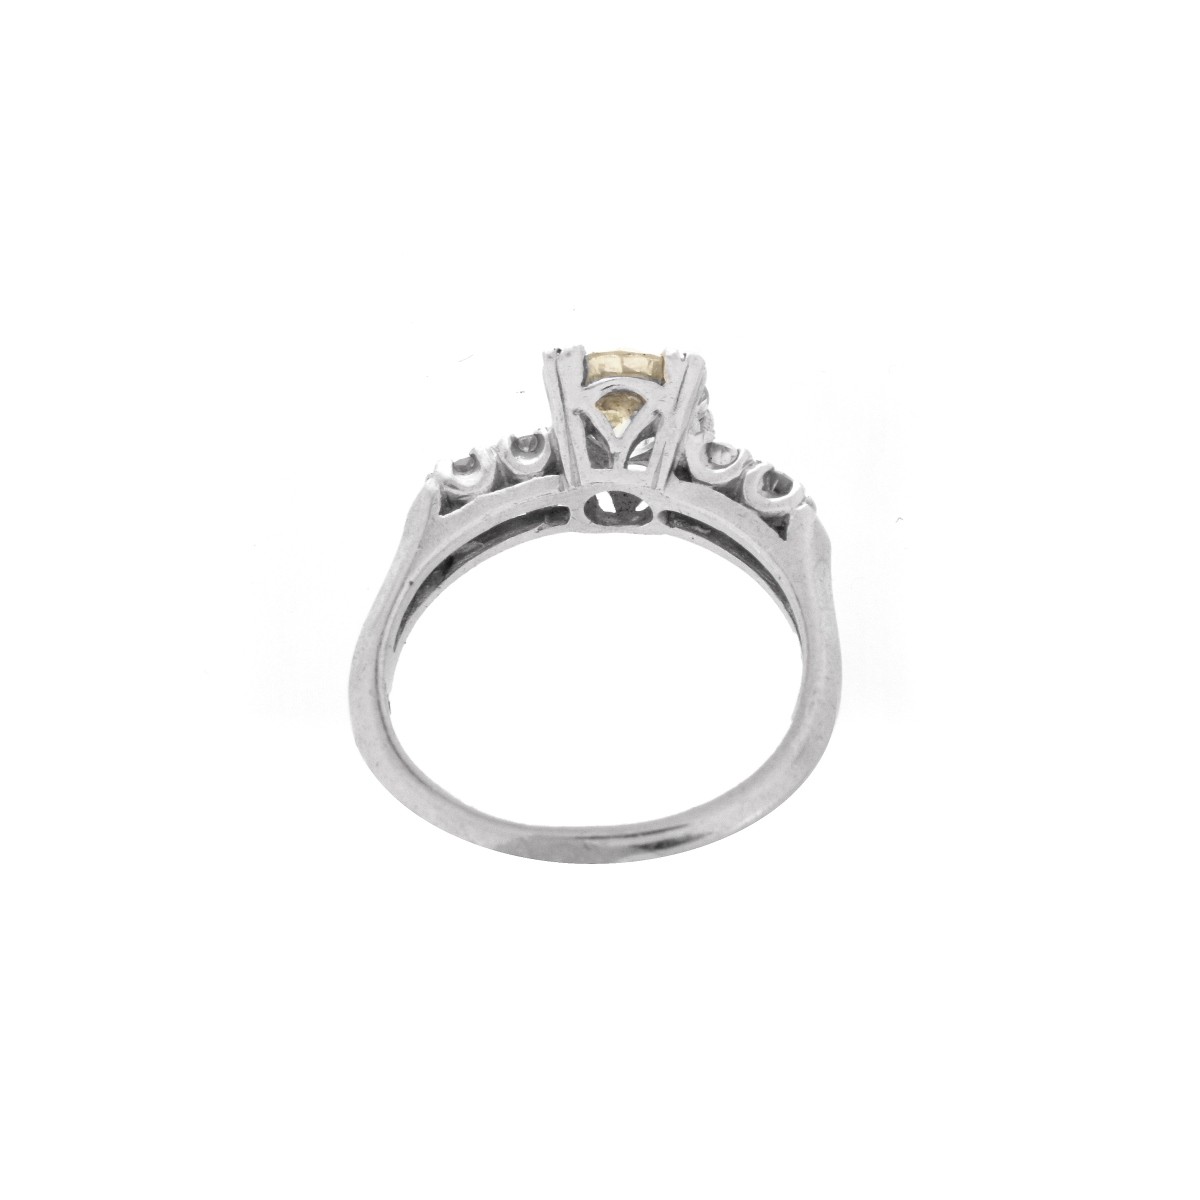 Antique Diamond and 18K Ring